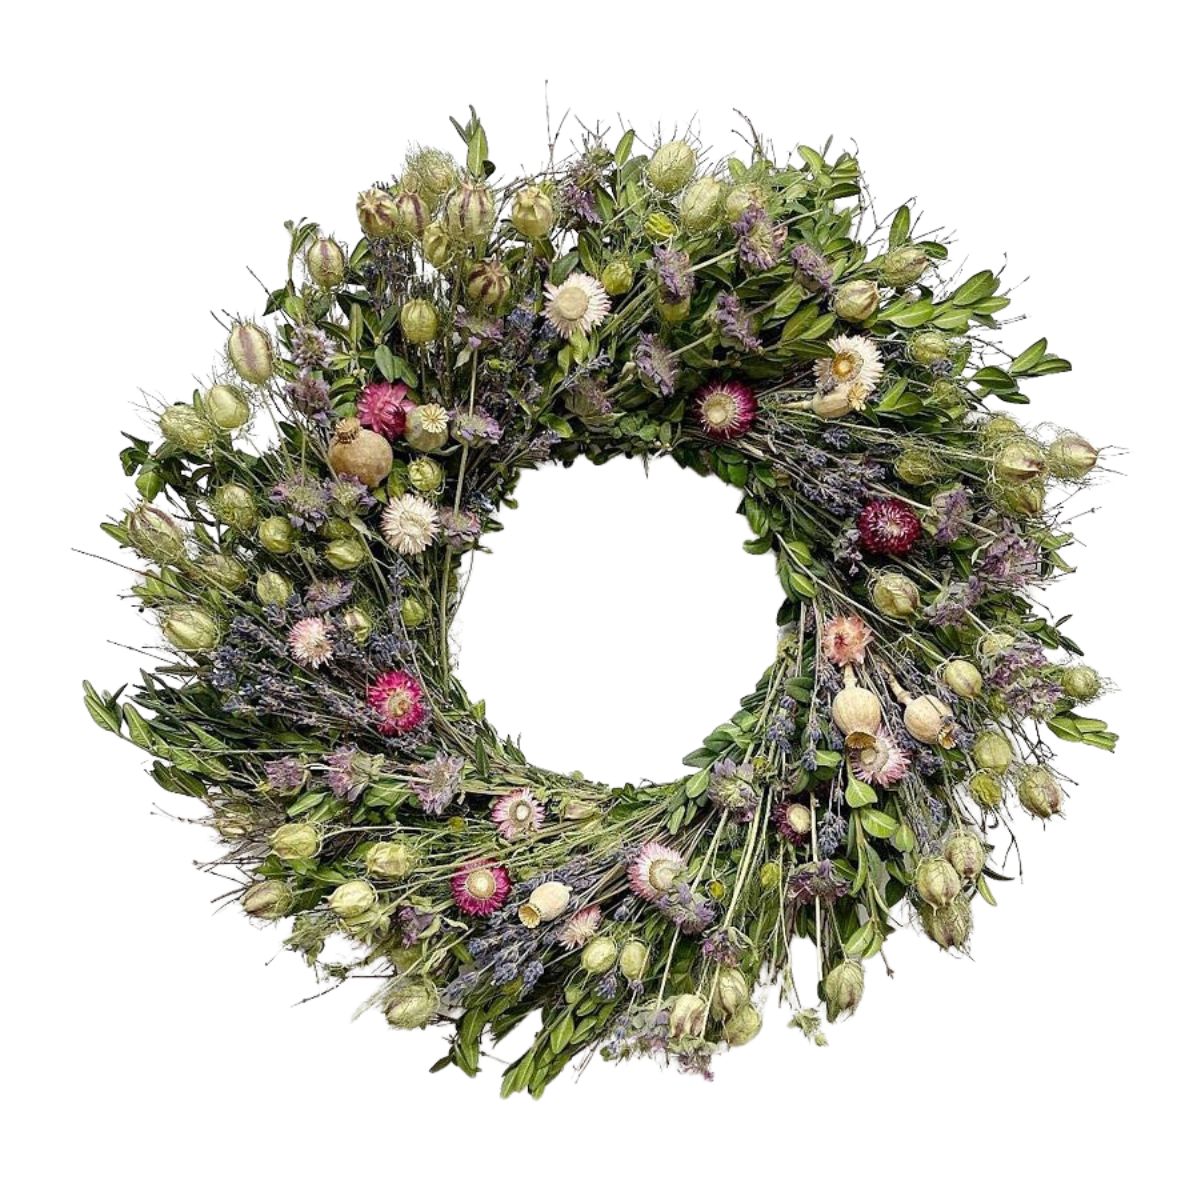 Dried Blossom Bounty Wreaths with organic flowers from Pottery Barn. 